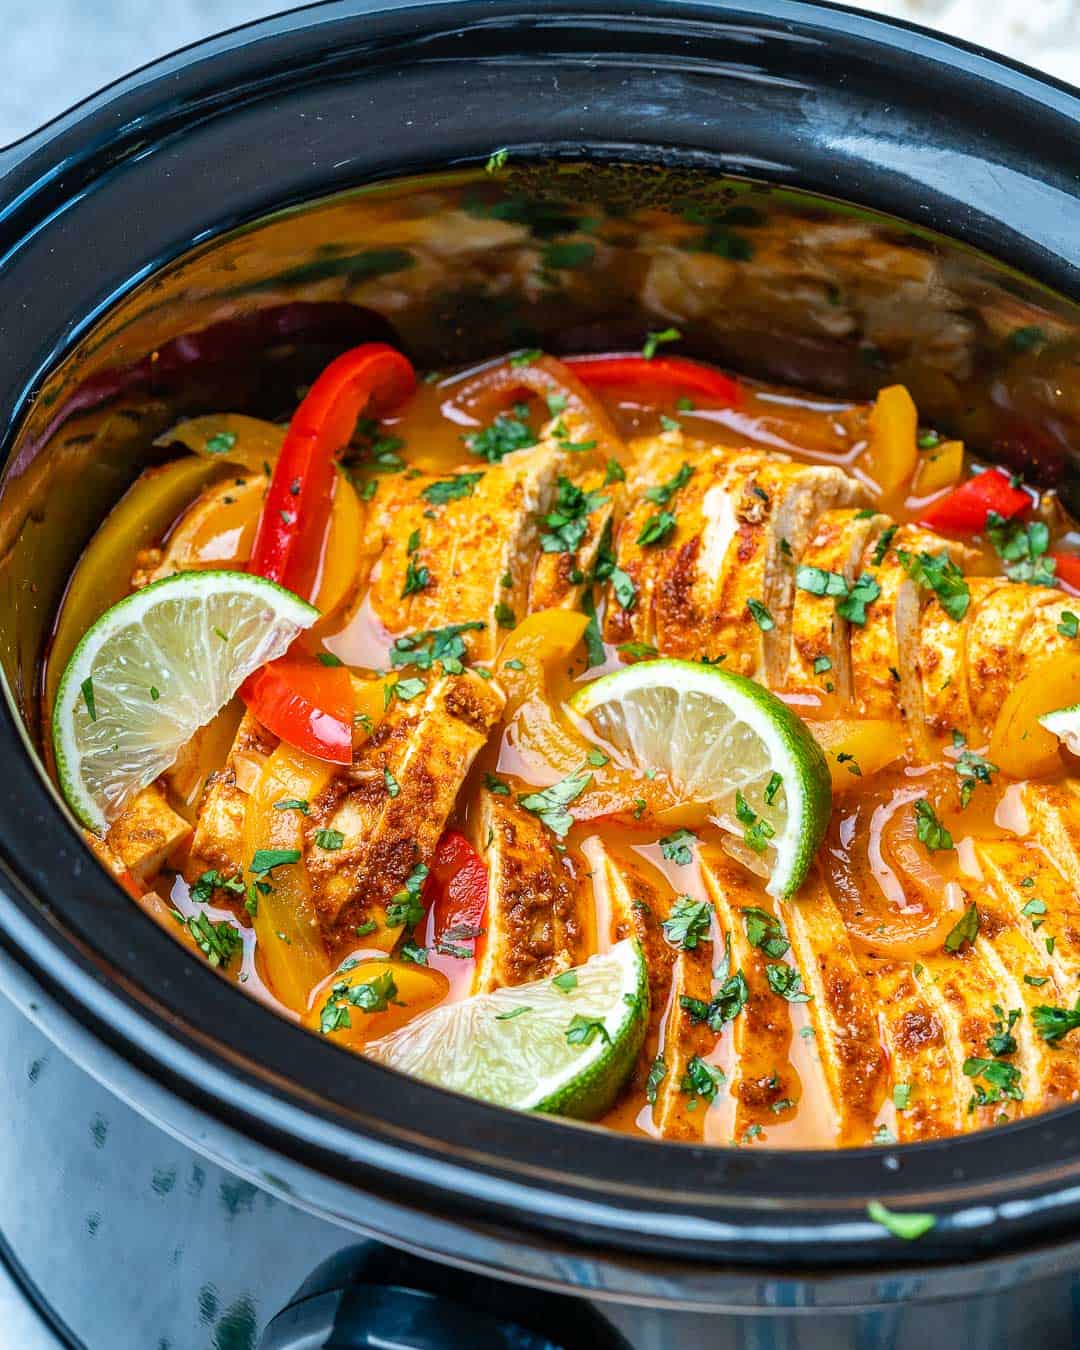 Crockpot with finished chicken fajitas garnished with lime and cilantro.